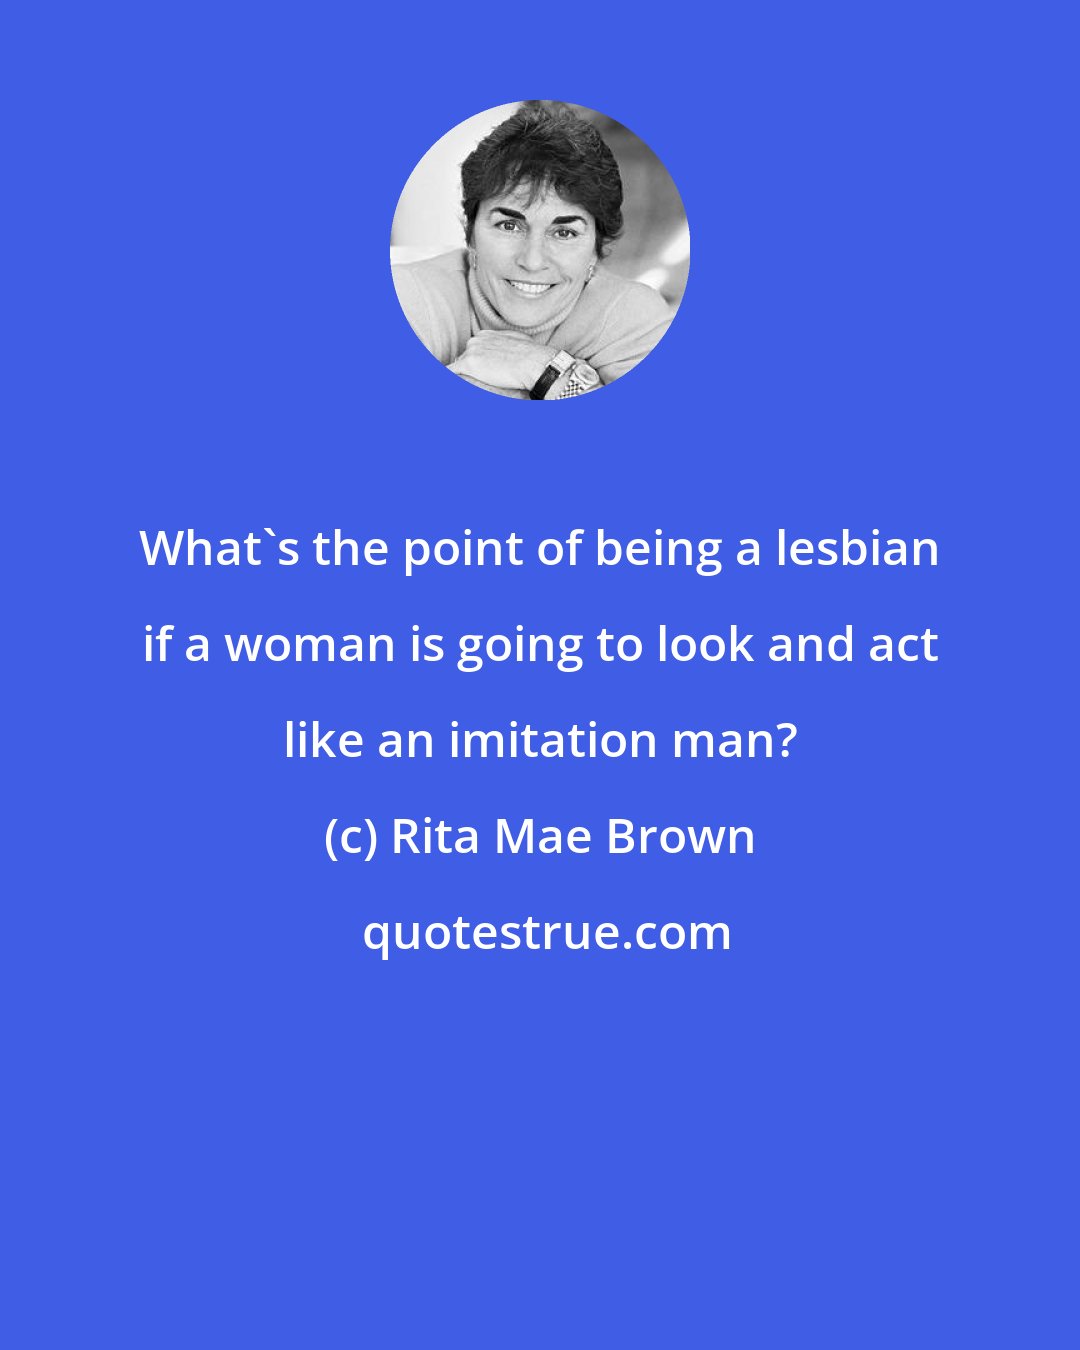 Rita Mae Brown: What's the point of being a lesbian if a woman is going to look and act like an imitation man?